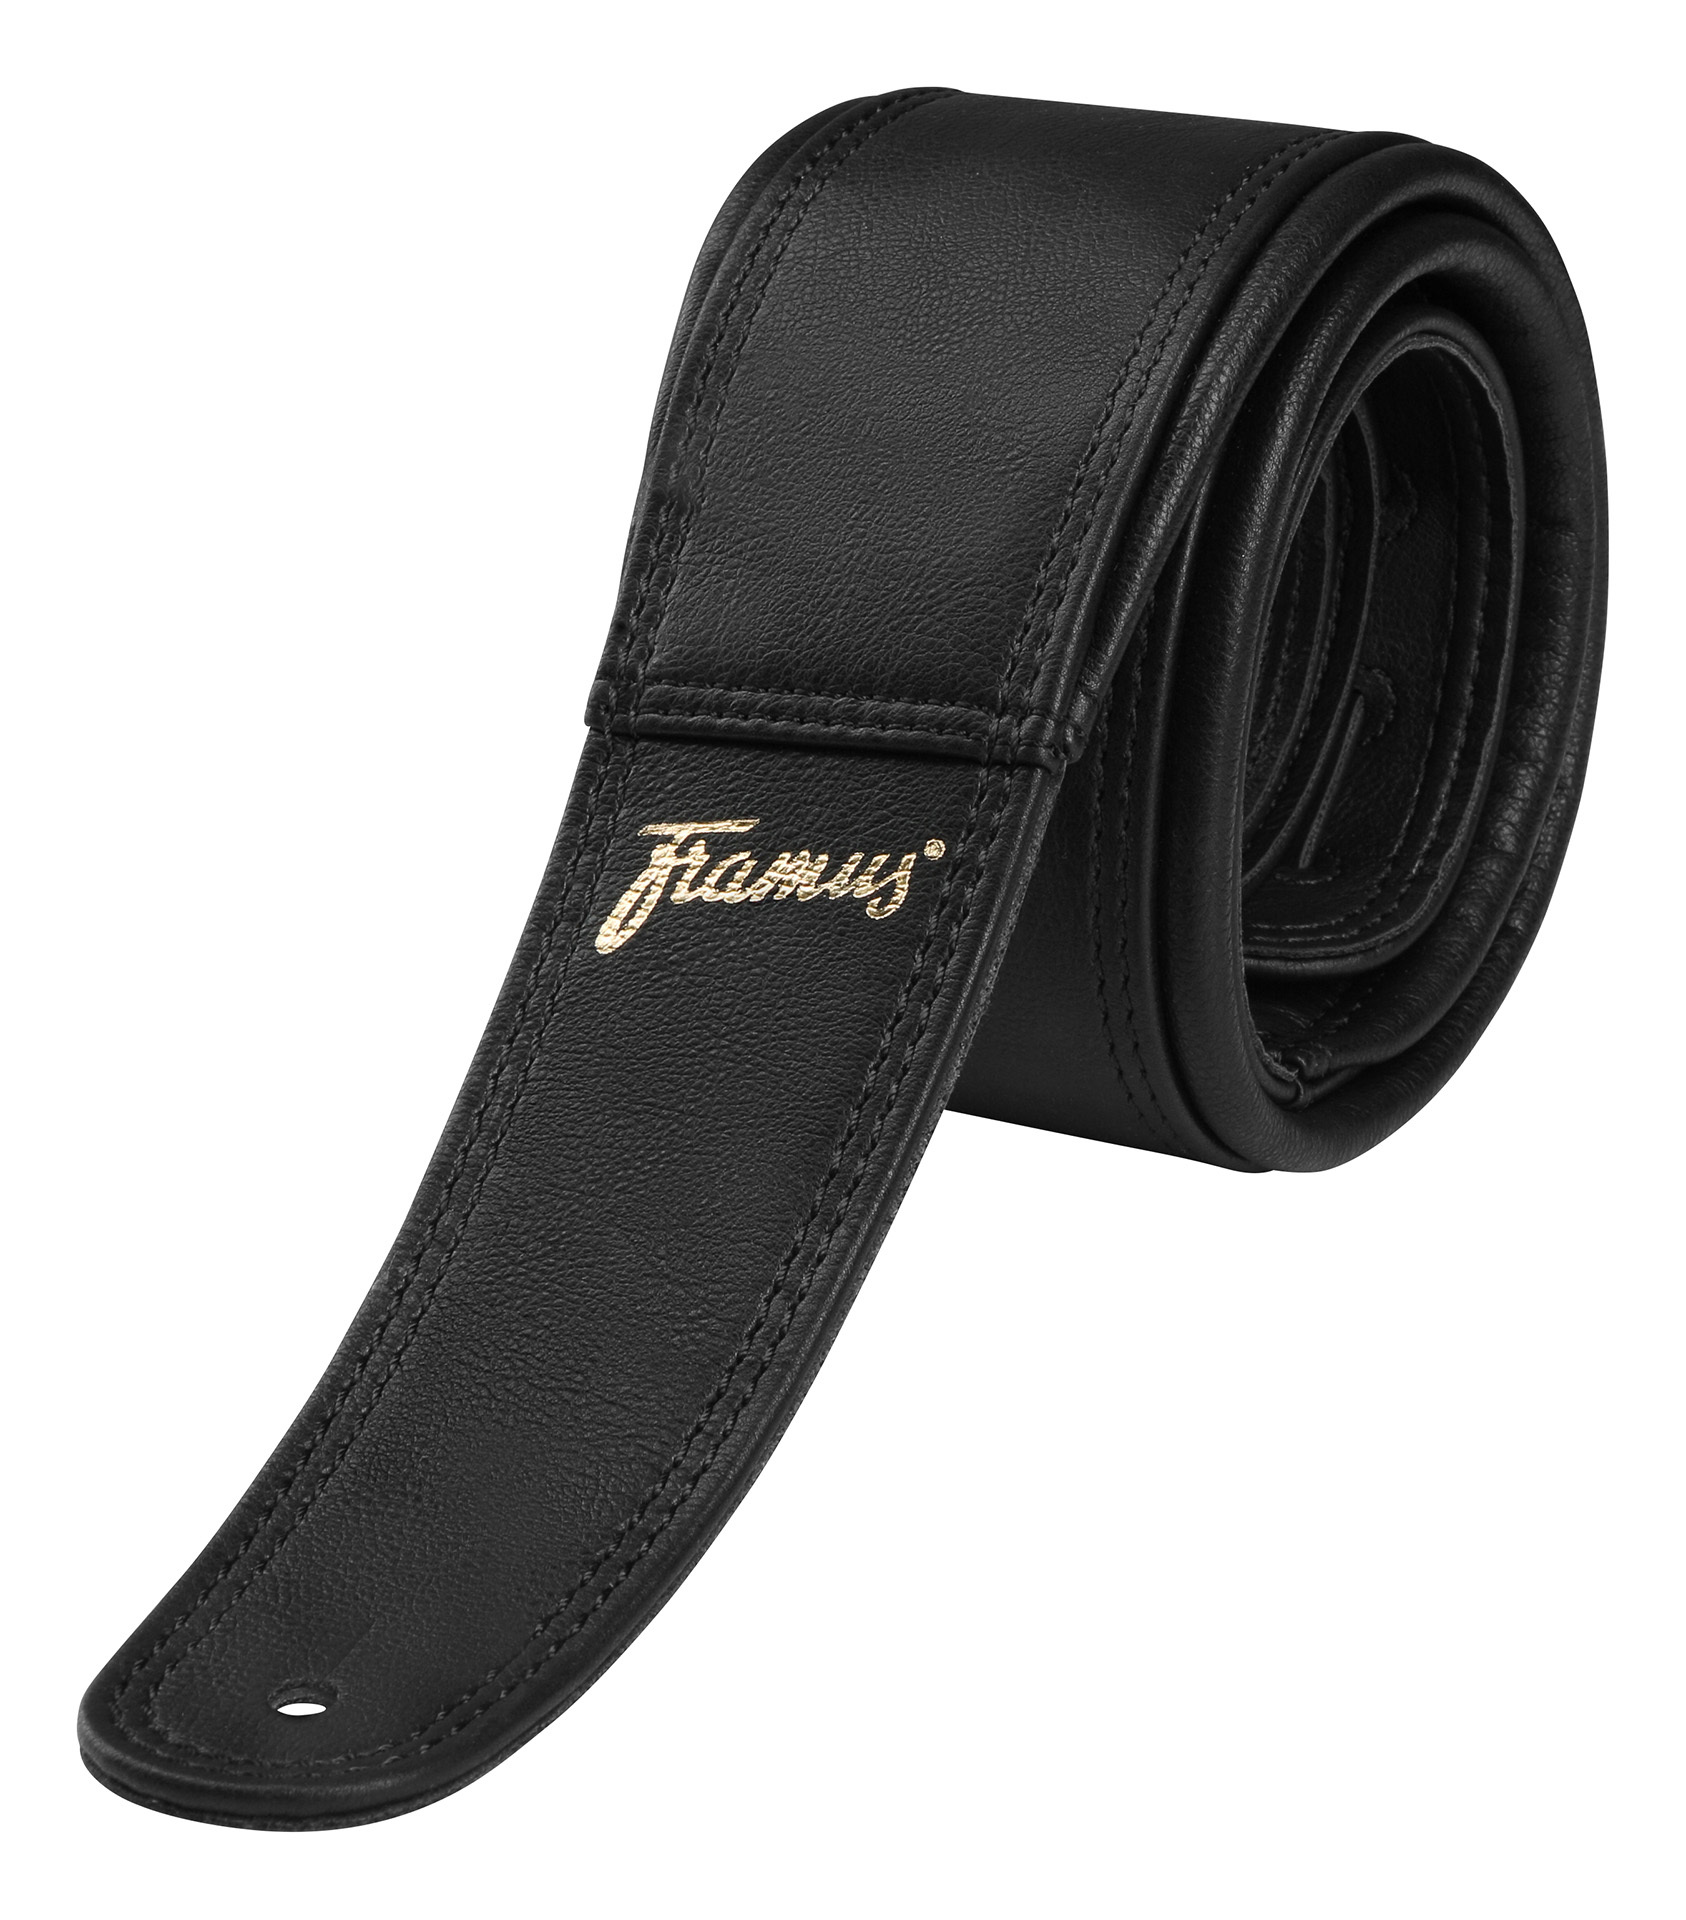 Framus Teambuilt Synthetic Leather Guitar Strap - Black, Gold Embossing